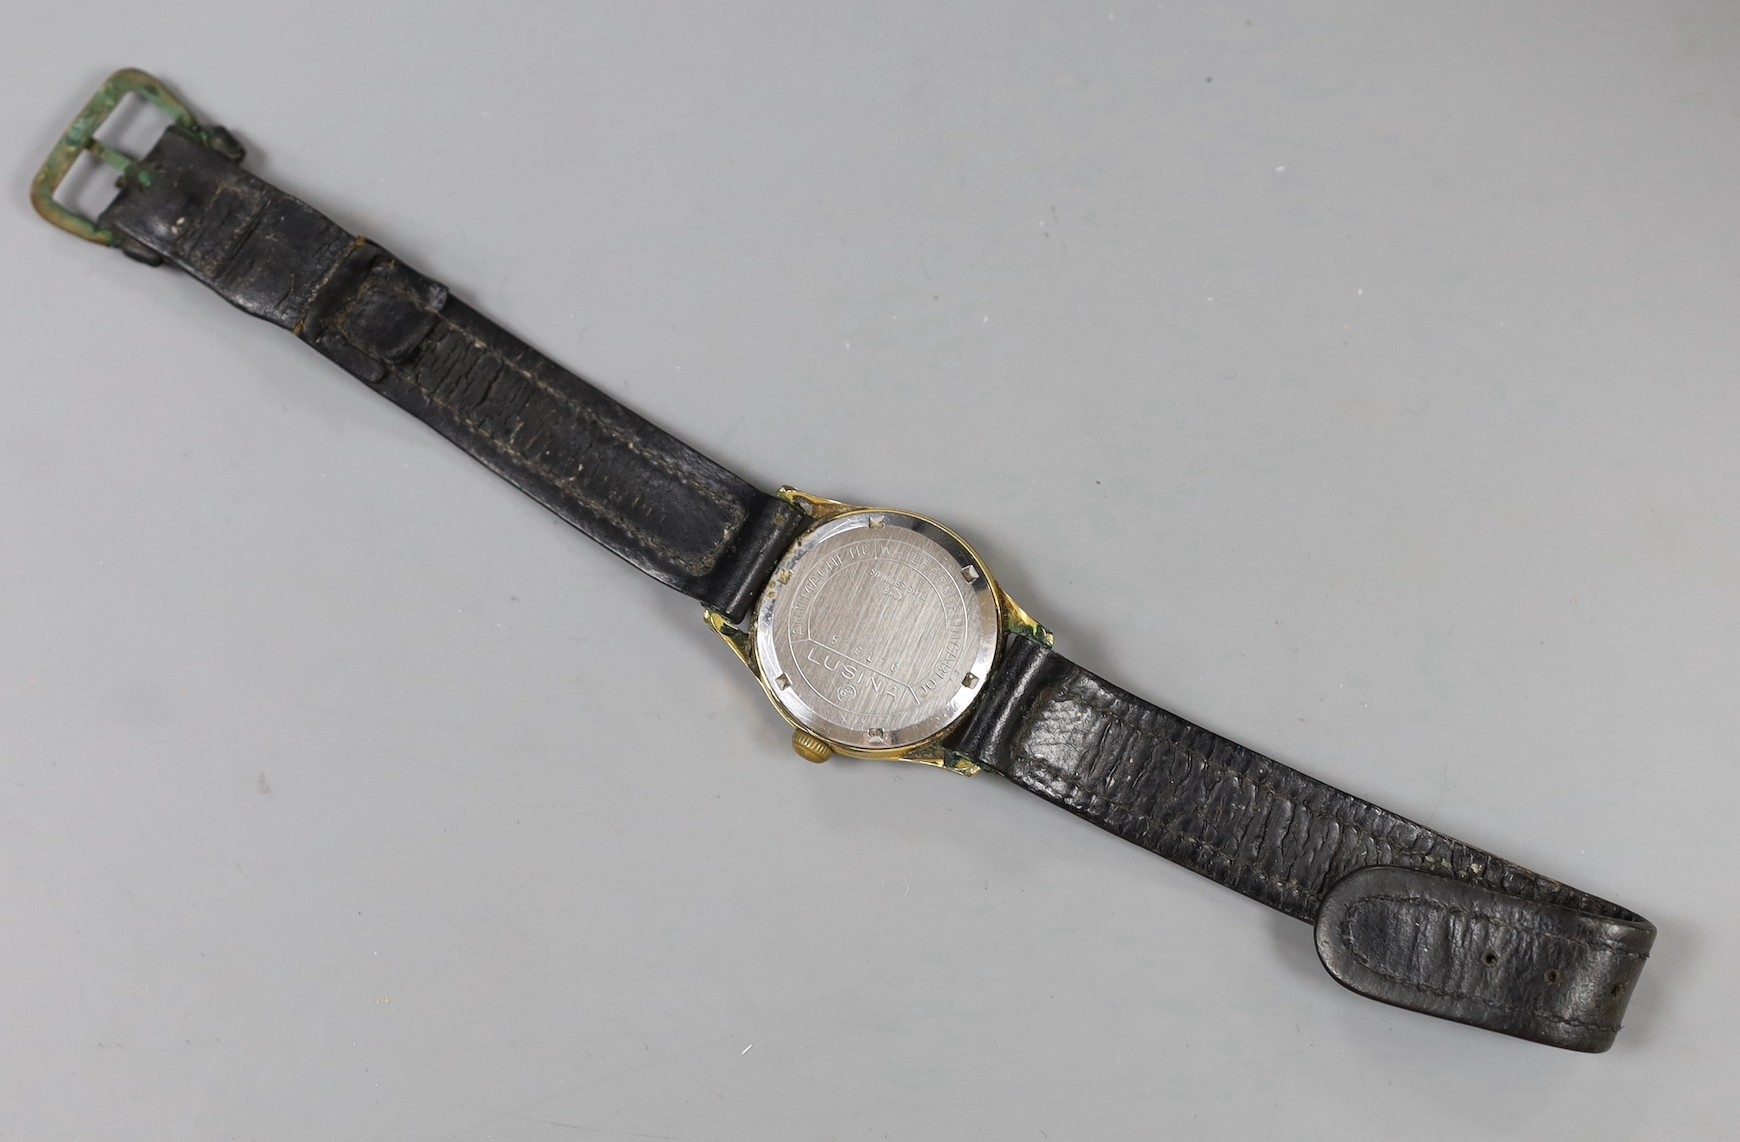 A steel and gold plated boy's size Lusina manual wind wrist watch, on leather strap.